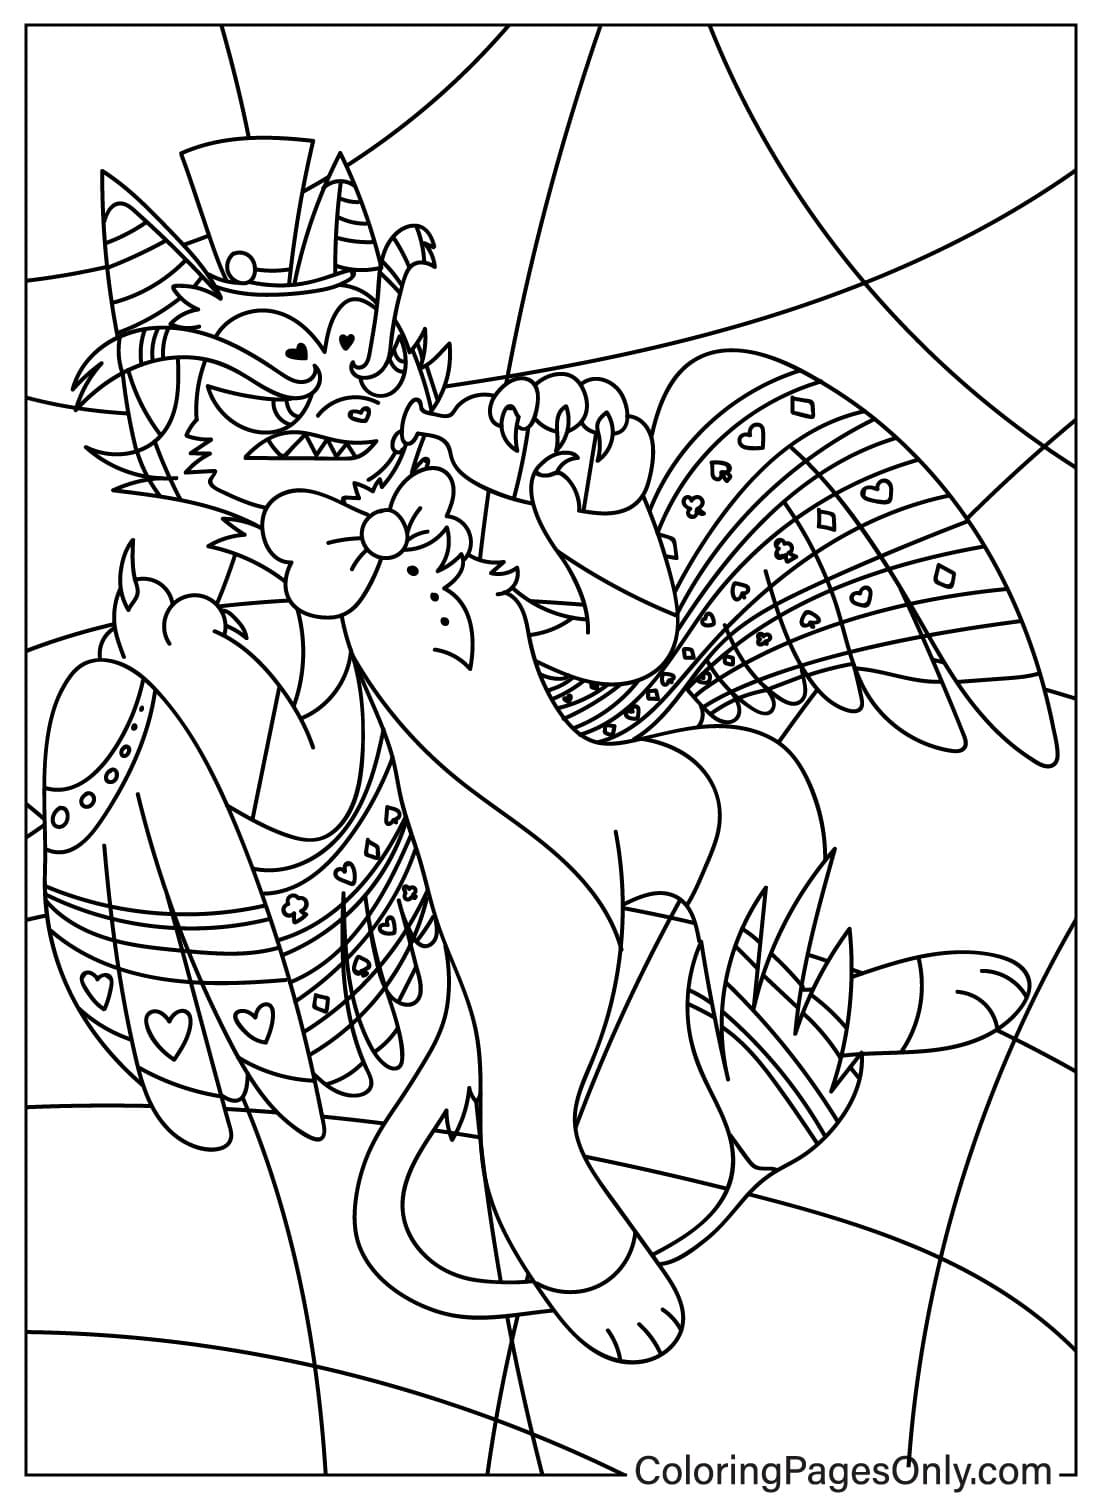 Images Husk Coloring Page from Husk